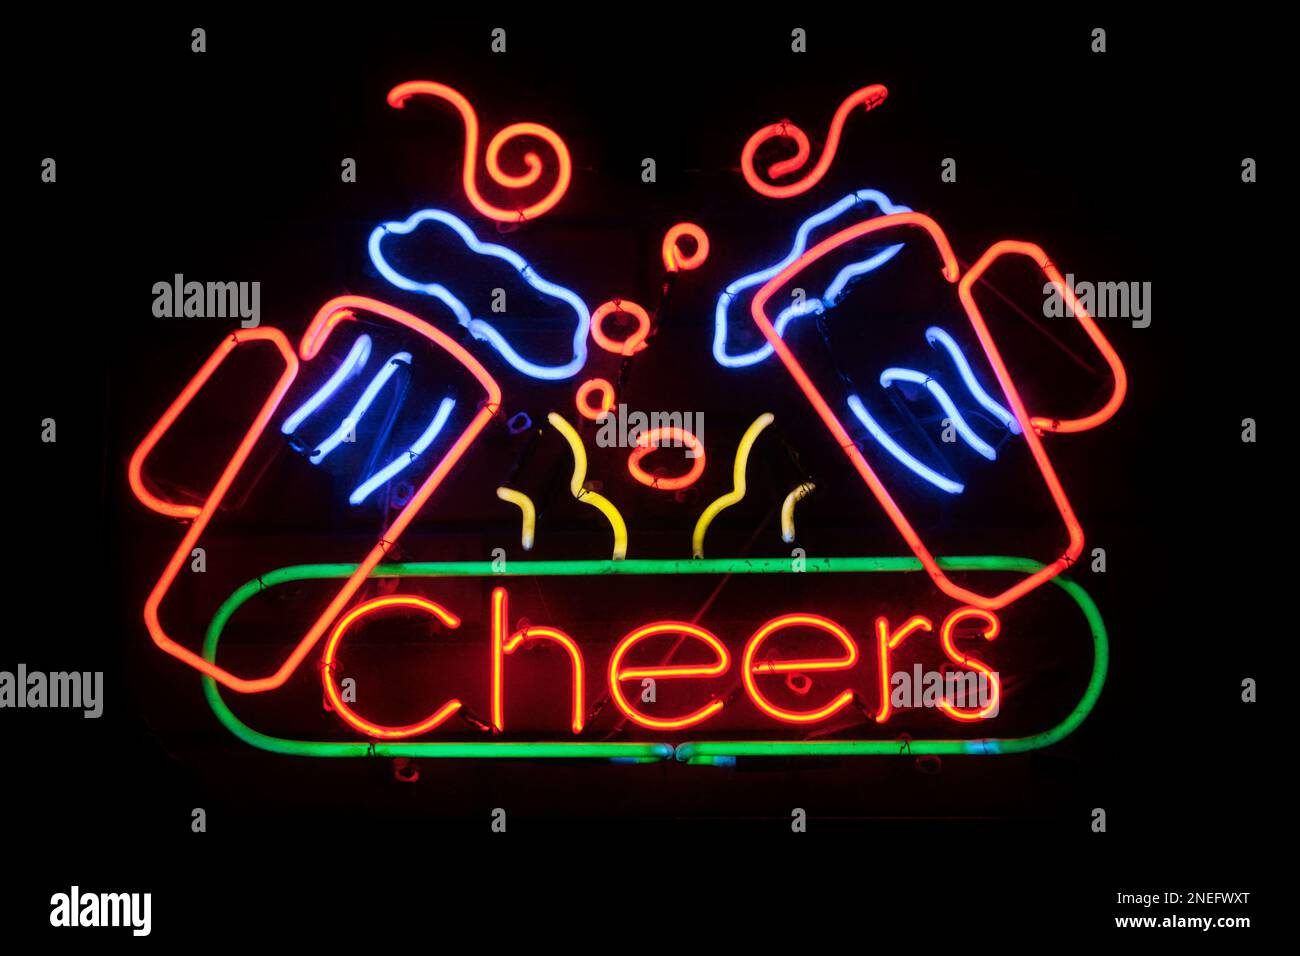 Neon light shaped into the word “Cheers” with two pint of beers above it. Stock Photo